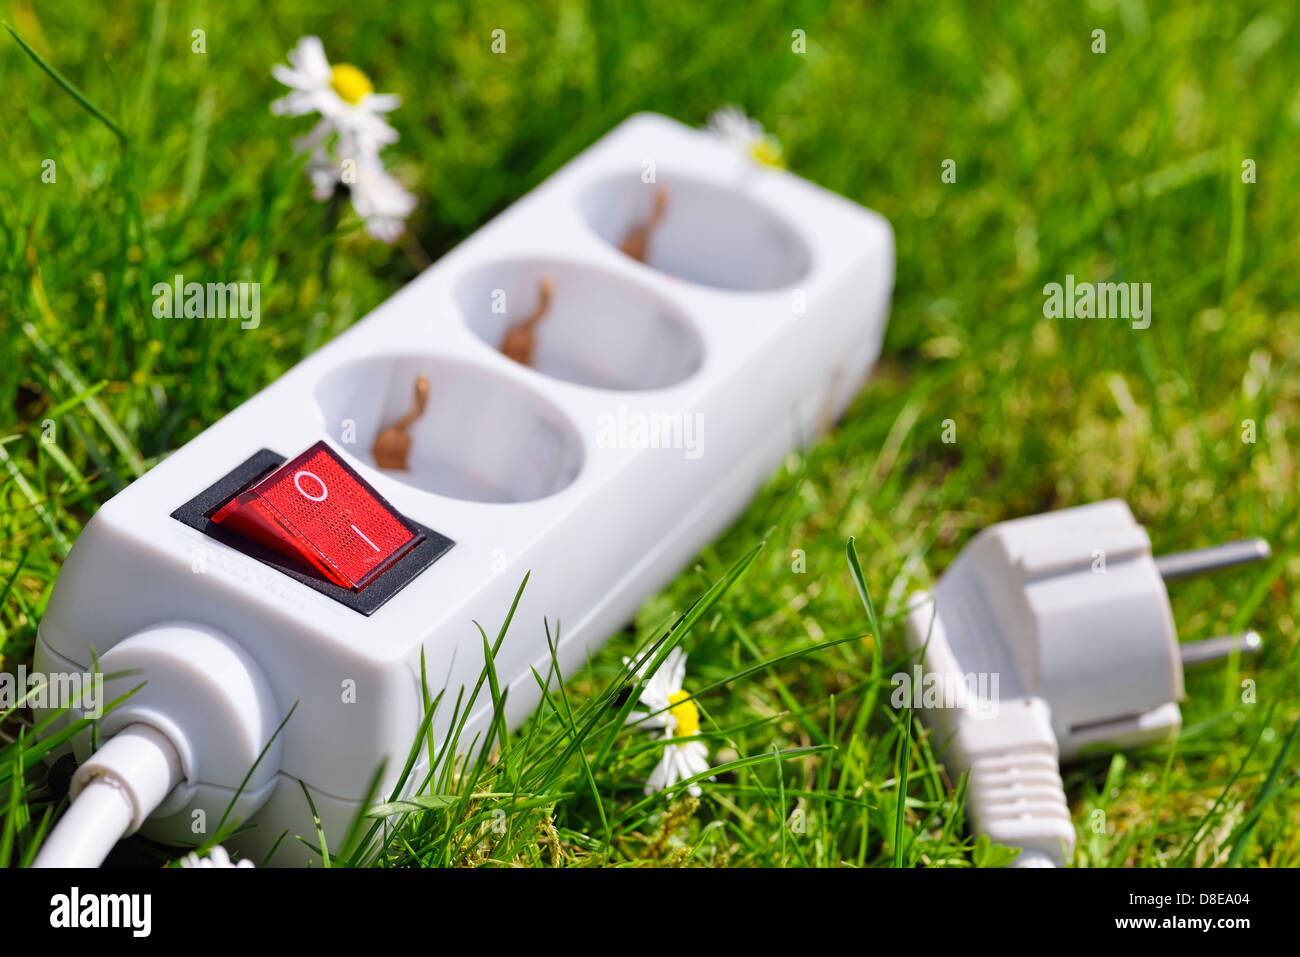 Outlet in grass, green energy symbol photo Stock Photo